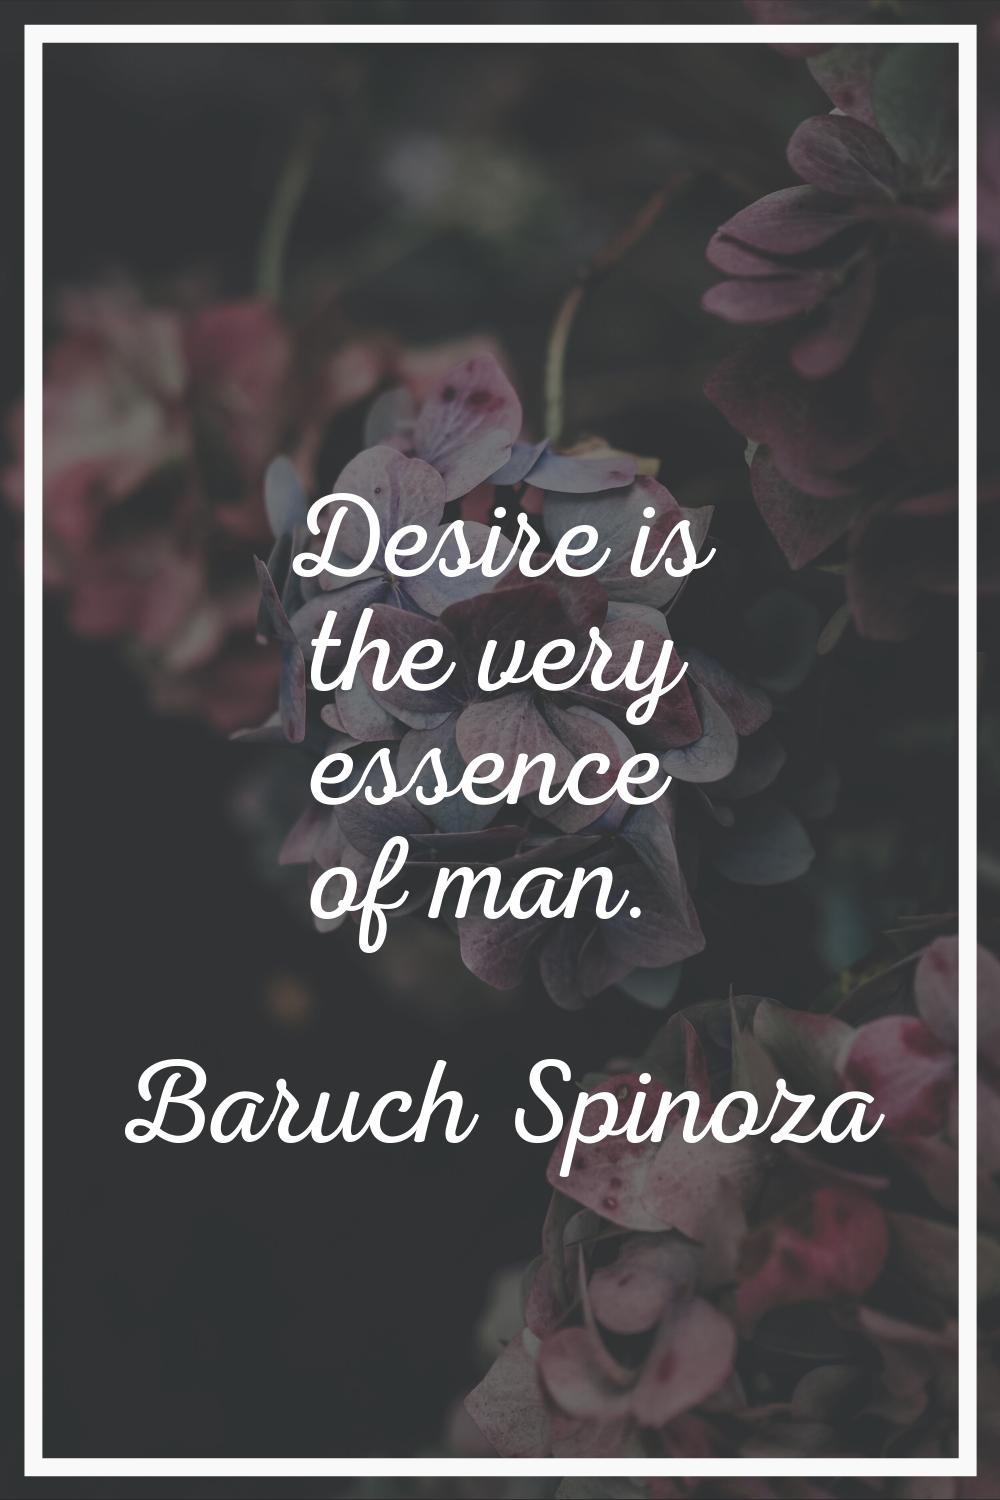 Desire is the very essence of man.